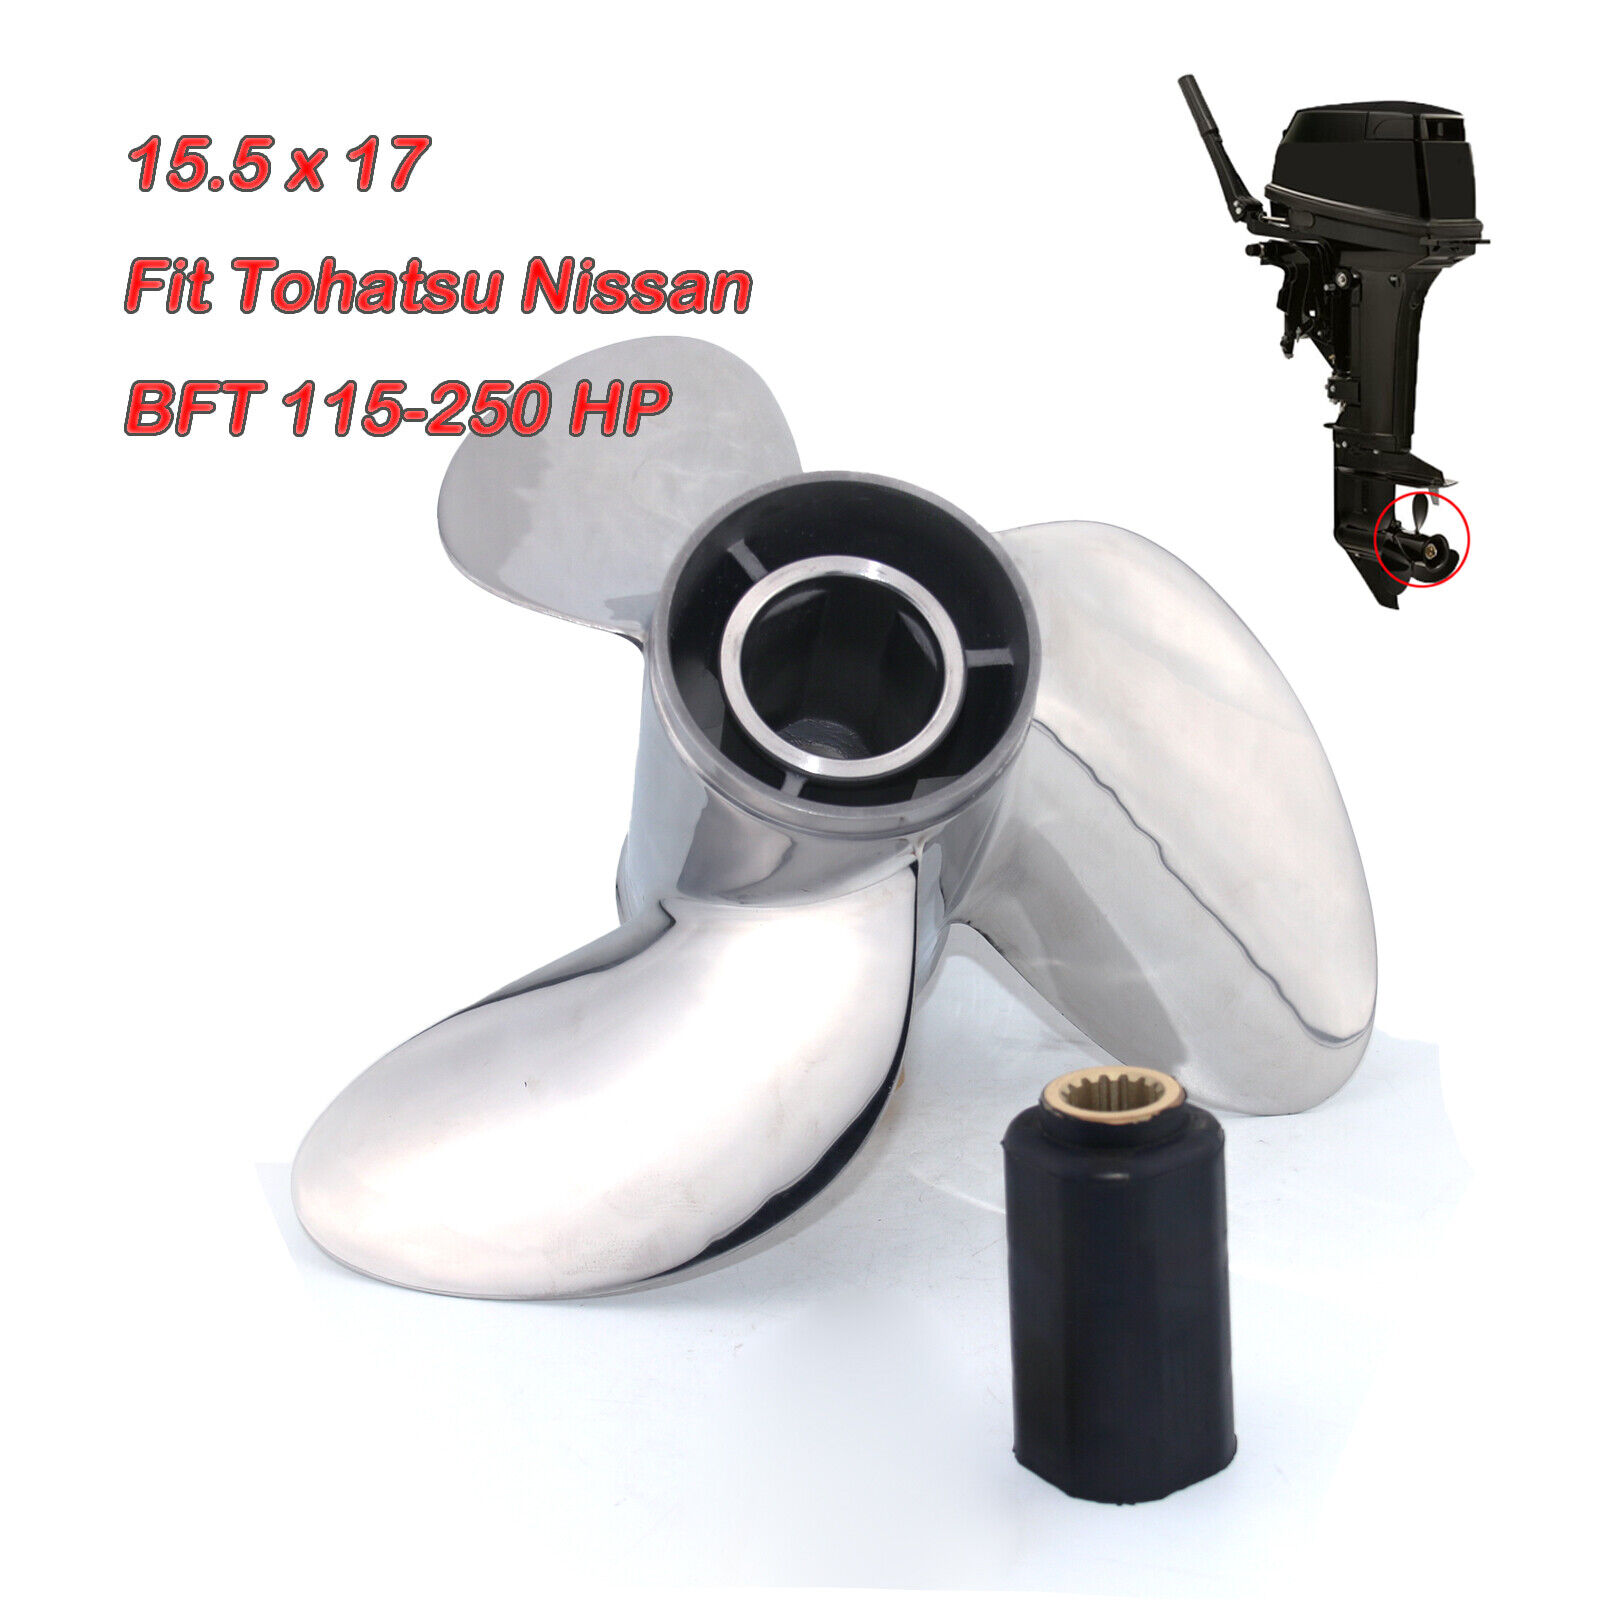 3 X 15.5 X 17 RH SS Propeller For TOHATSU NISSAN BFT 115-250 HP Outboard Engine